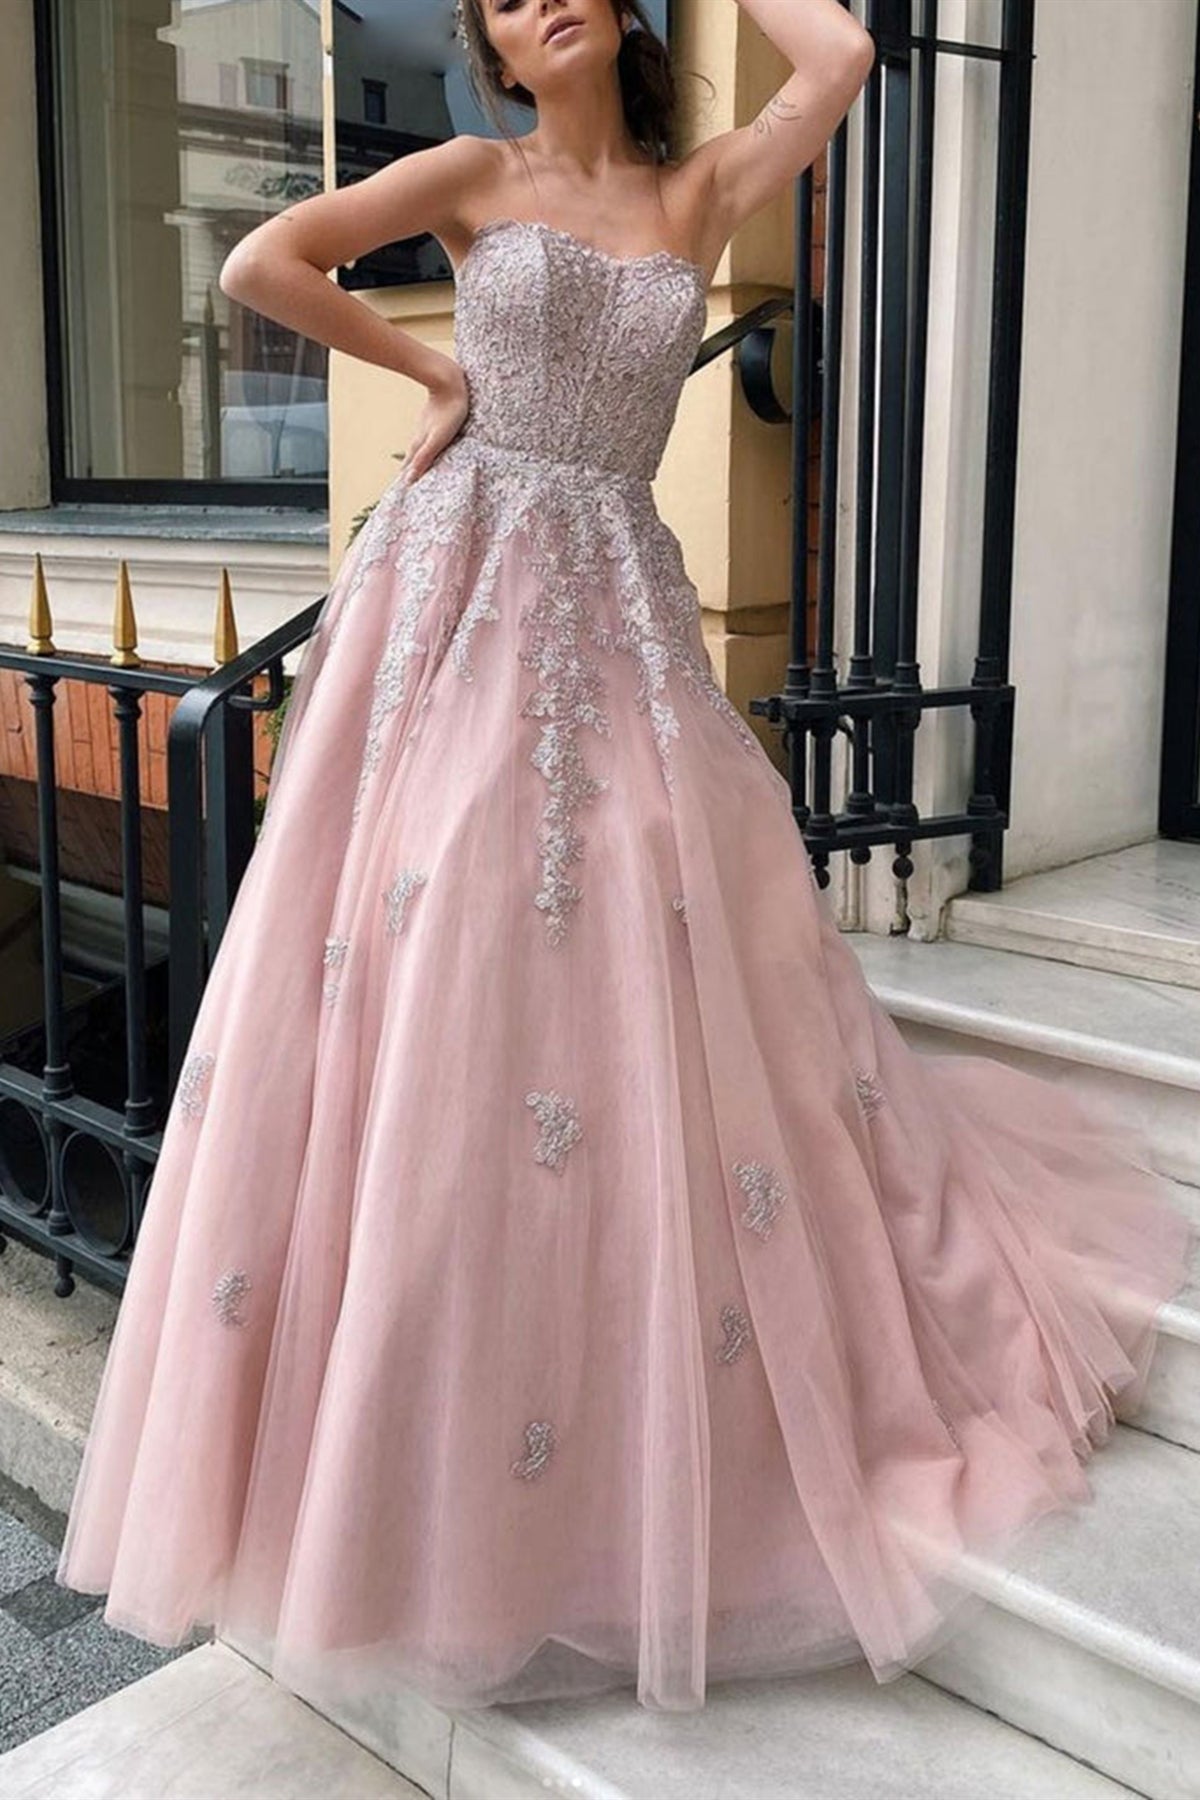 Strapless Open Back Pink Tulle Long Prom Dresses with Lace Appliques, Pink Lace Formal Graduation Evening Dresses